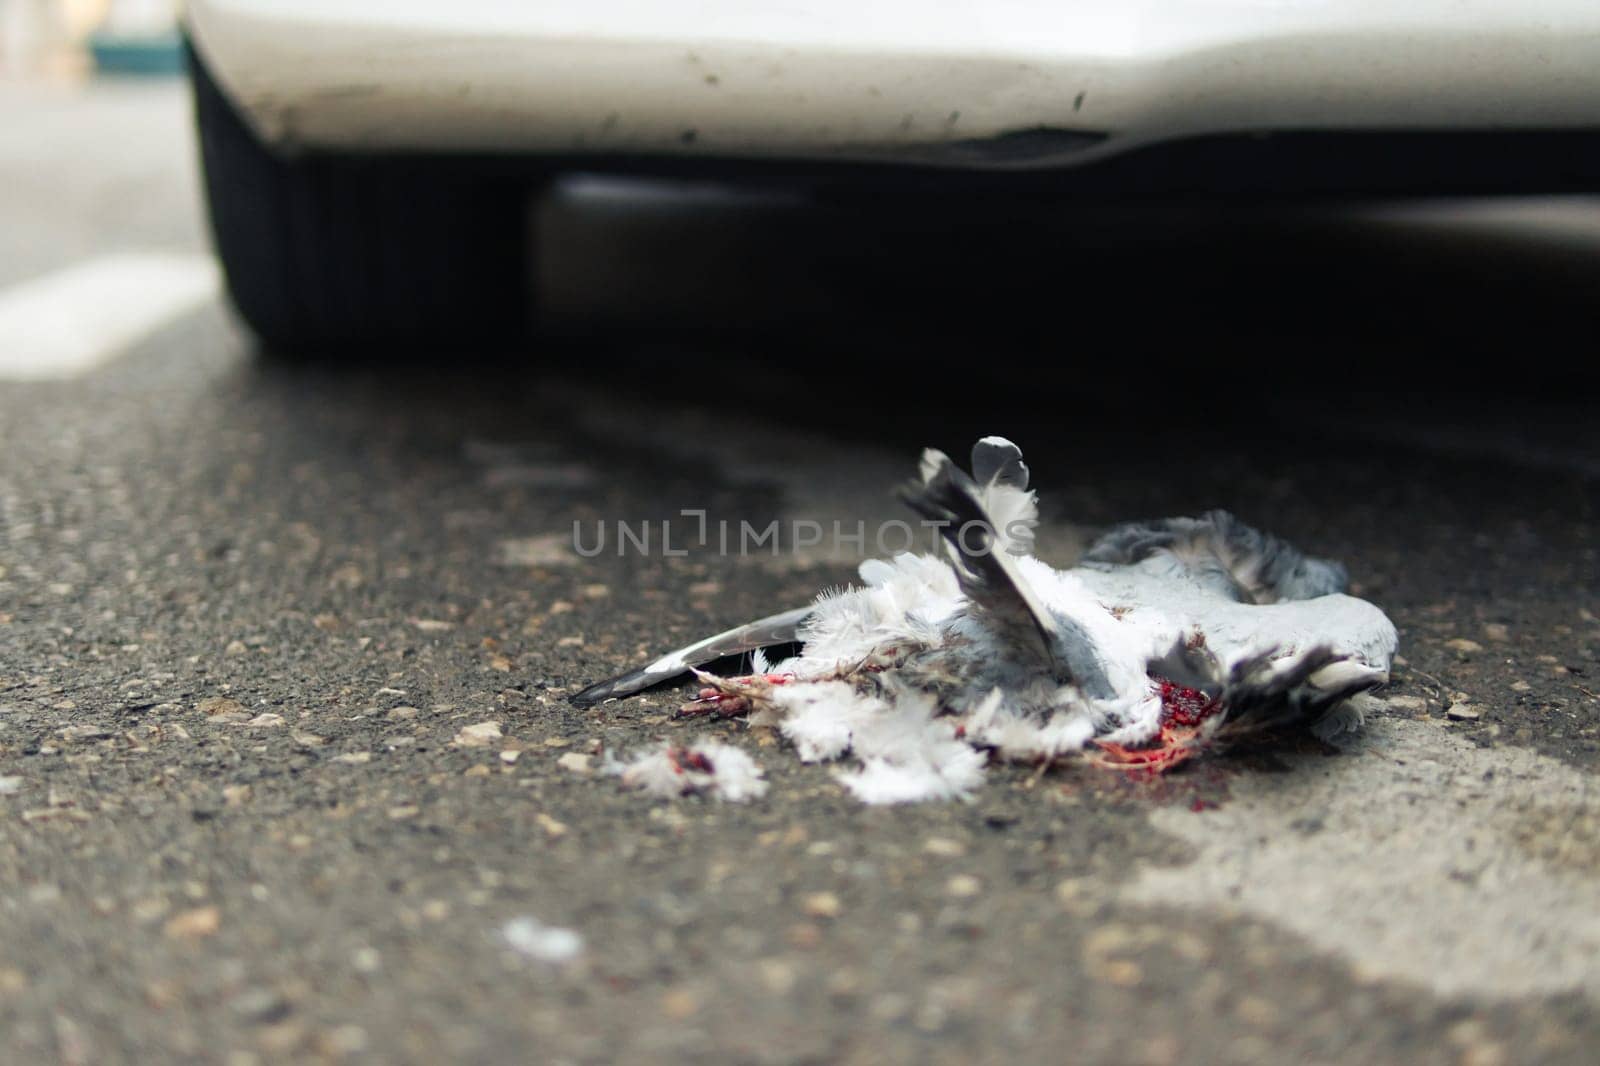 a close-up of a bird that was hit by a car lies on the road, a close-up of a dead bird,an insured event, an accident on the road by PopOff